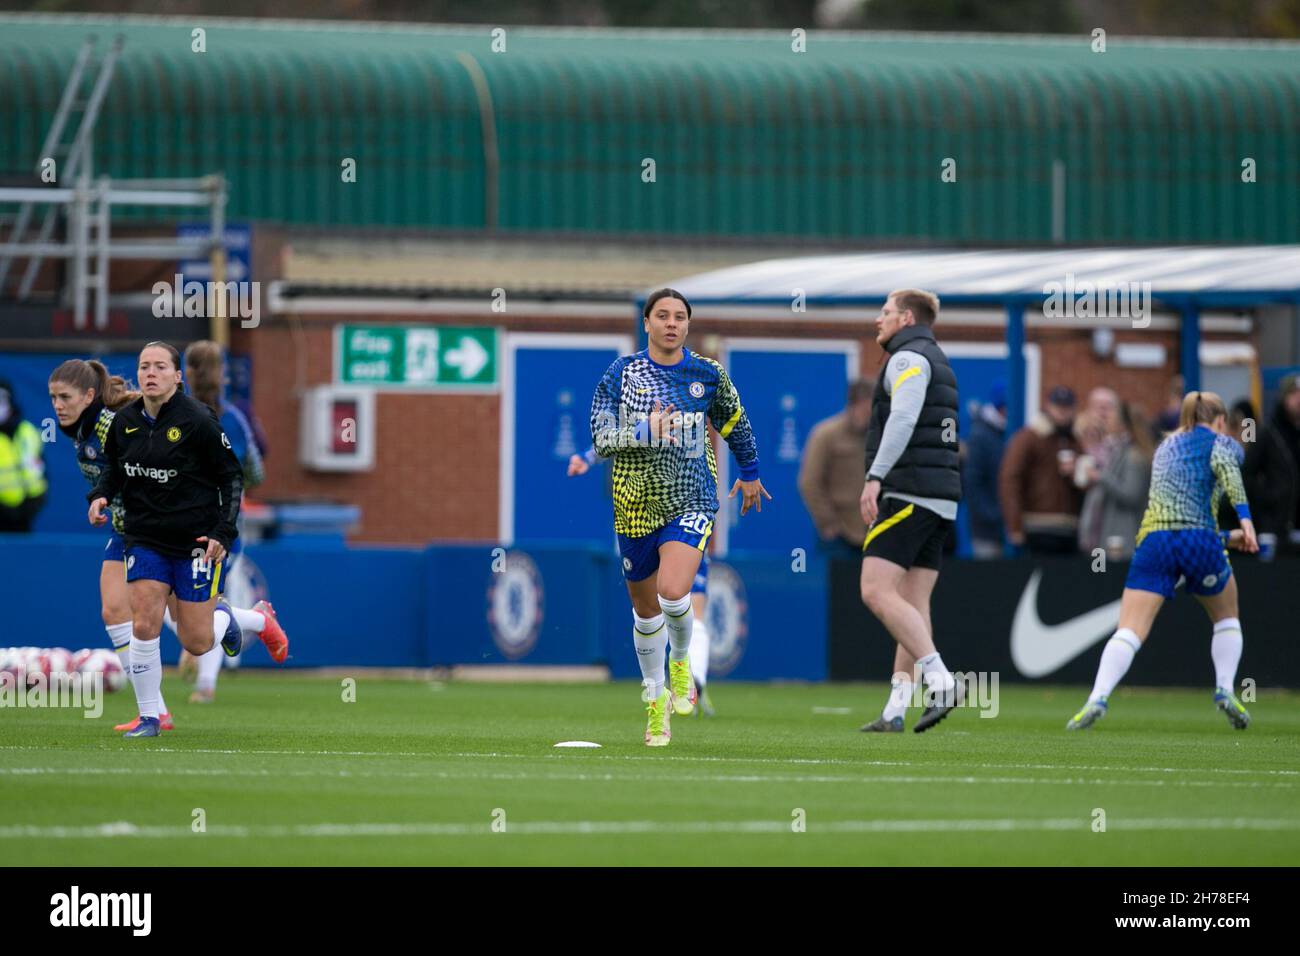 London, UK. 21st Nov, 2021. LONDON, UK. NOVEMBER 21ST : Chelsea squad warms up during the 2021-22 FA Womens Superleague fixture between Chelsea FC and Birmingham City at Kingsmeadow. Credit: Federico Guerra Morán/Alamy Live News Stock Photo